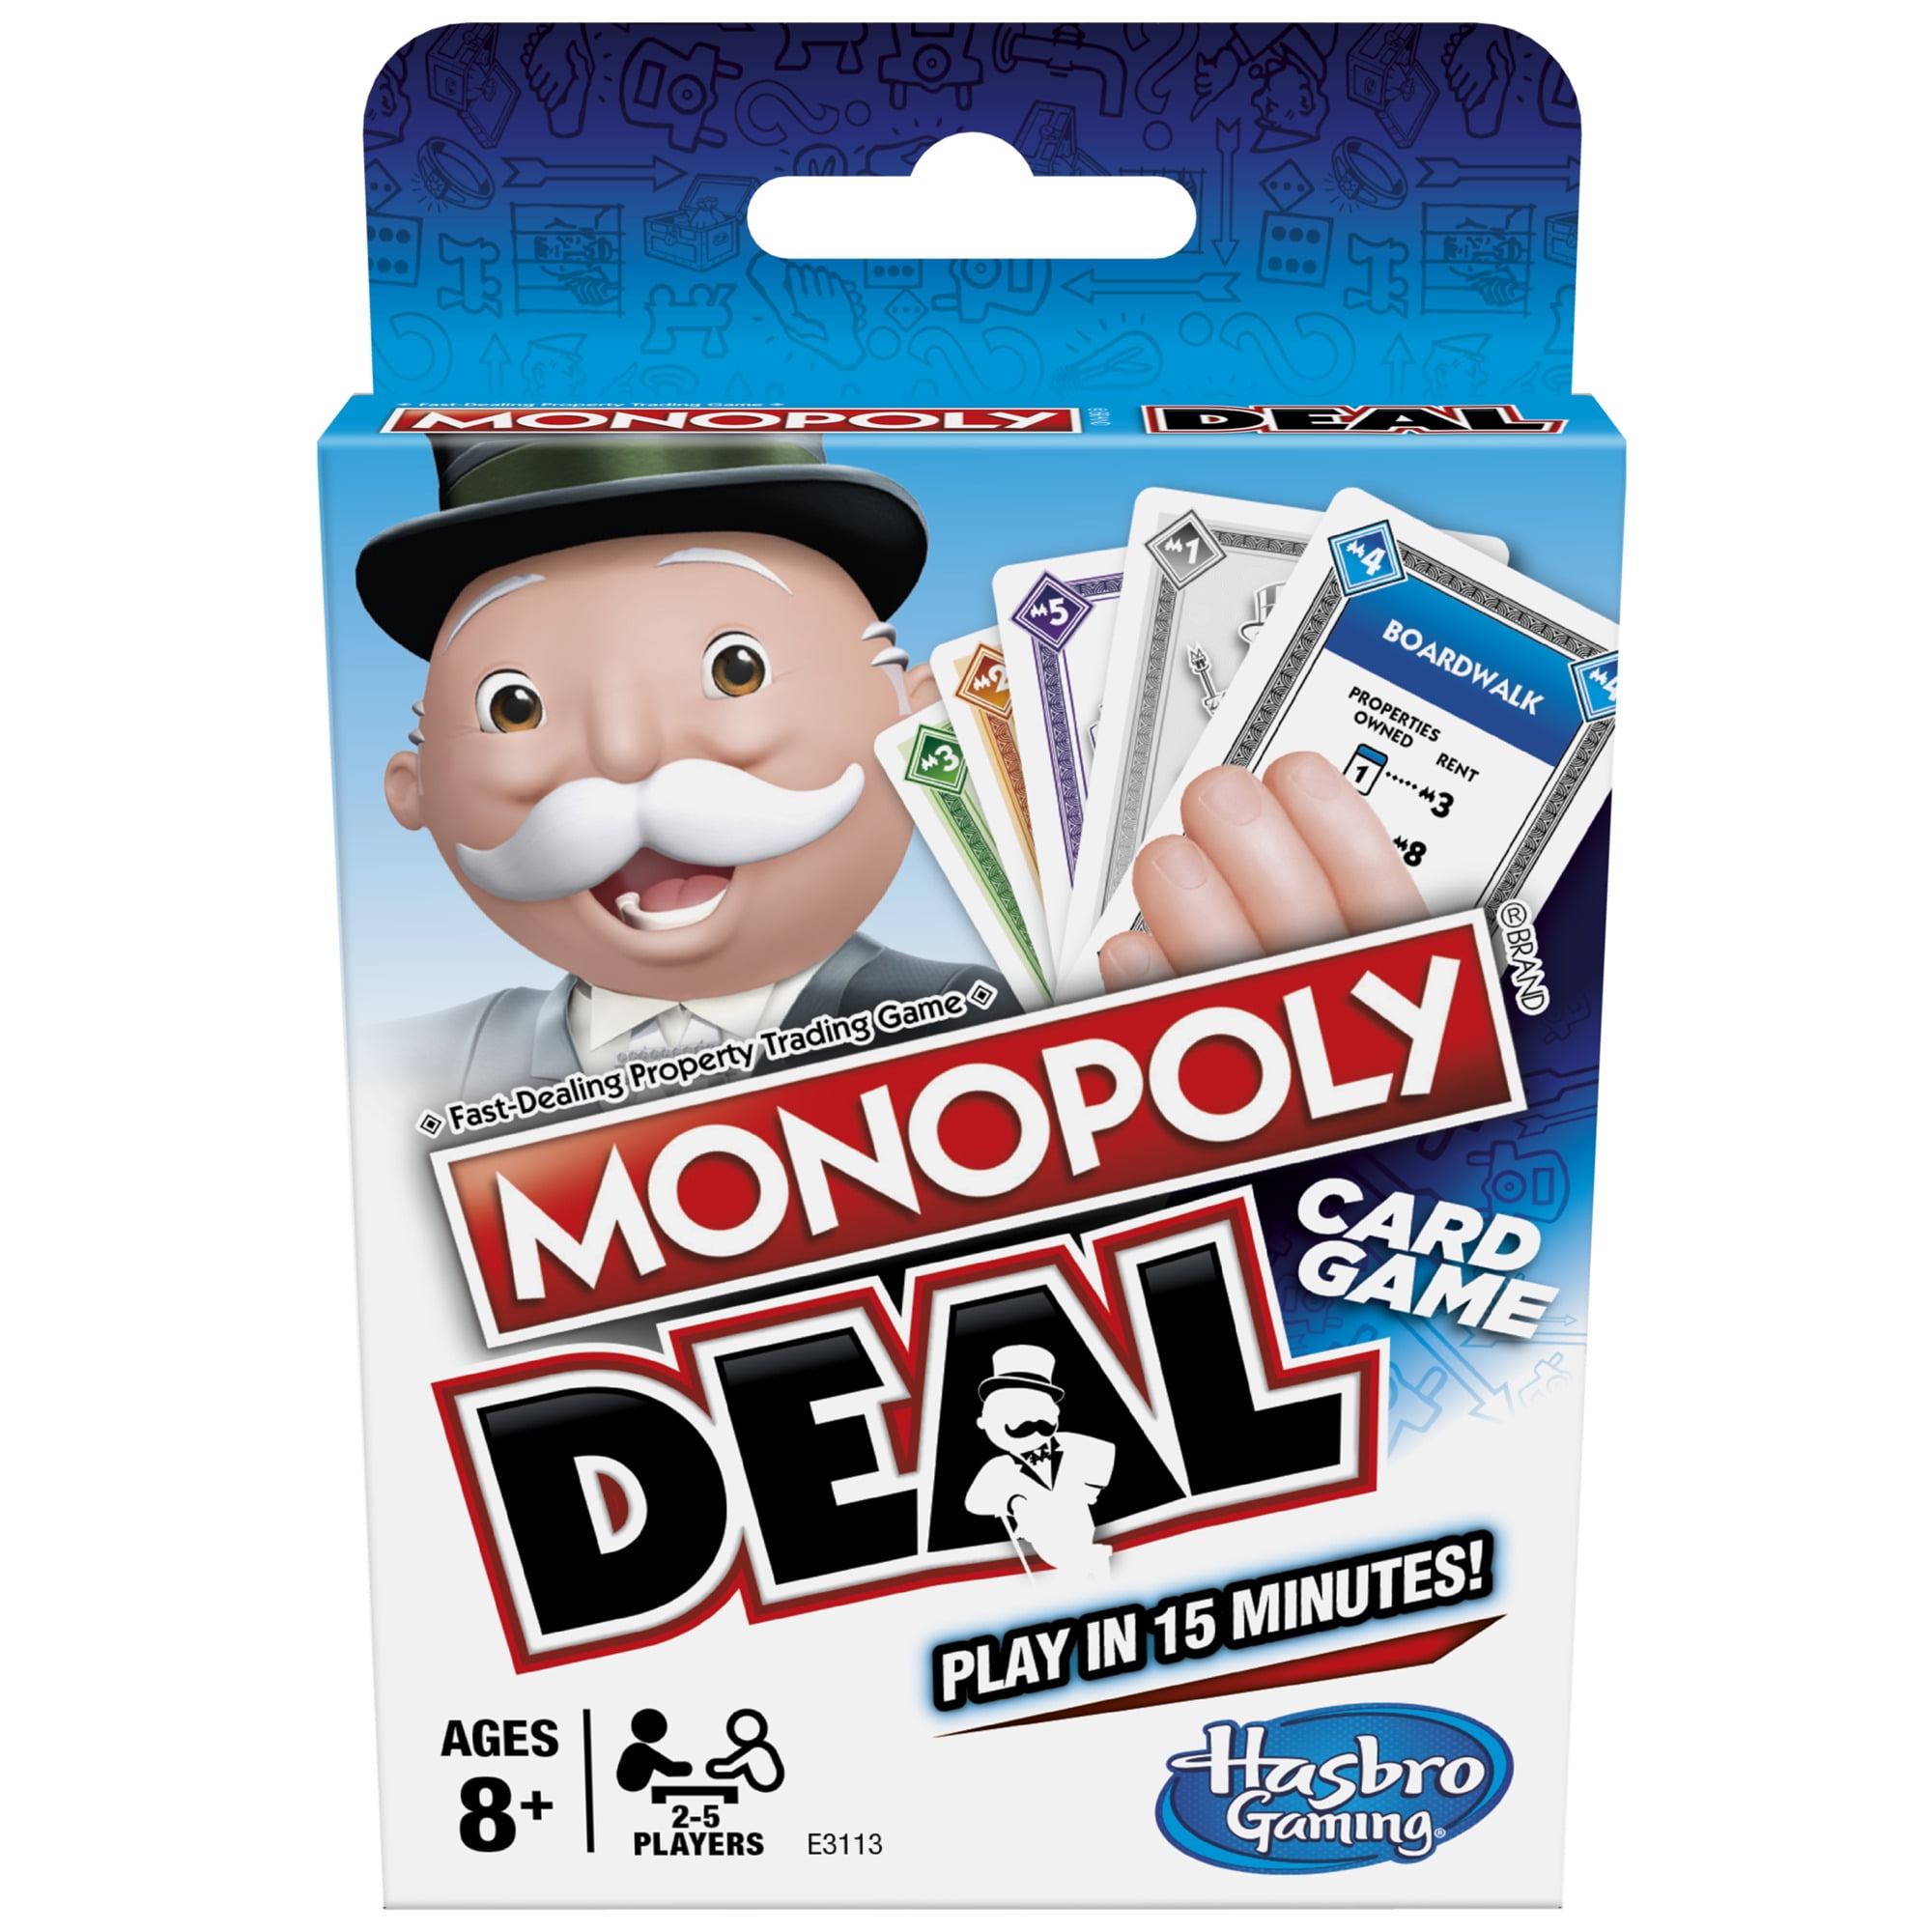 Monopoly Deal Card Game, for 2 to 5 Players, Card Game for Kids Ages 8 and Up